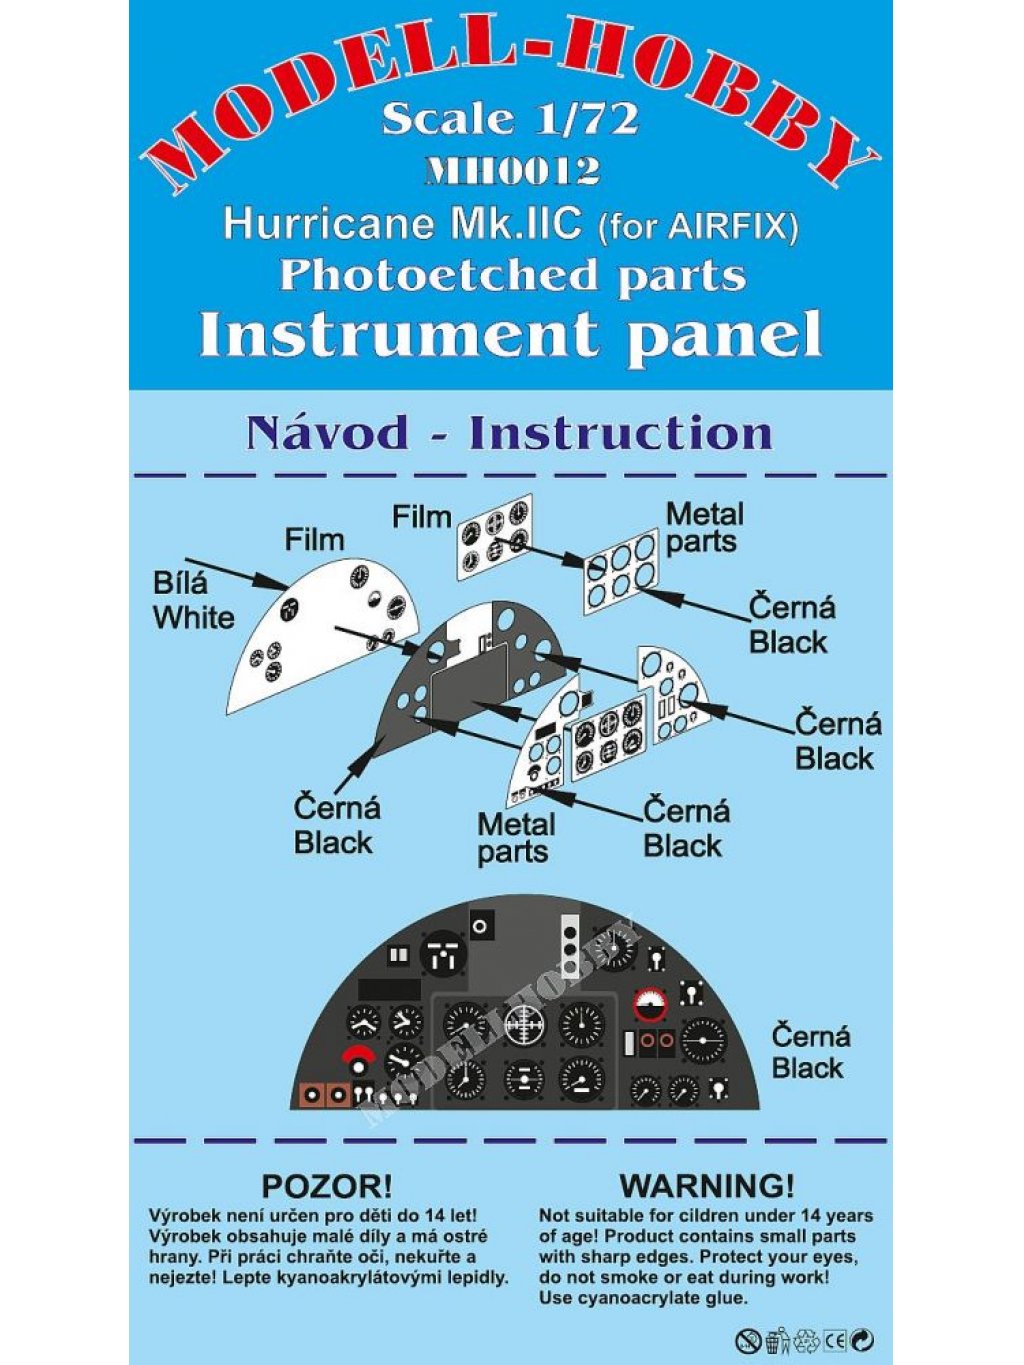 Hawker Hurricane Mk.IIC Photoetched parts instrument panel for Airfix ex Modell-Hobby